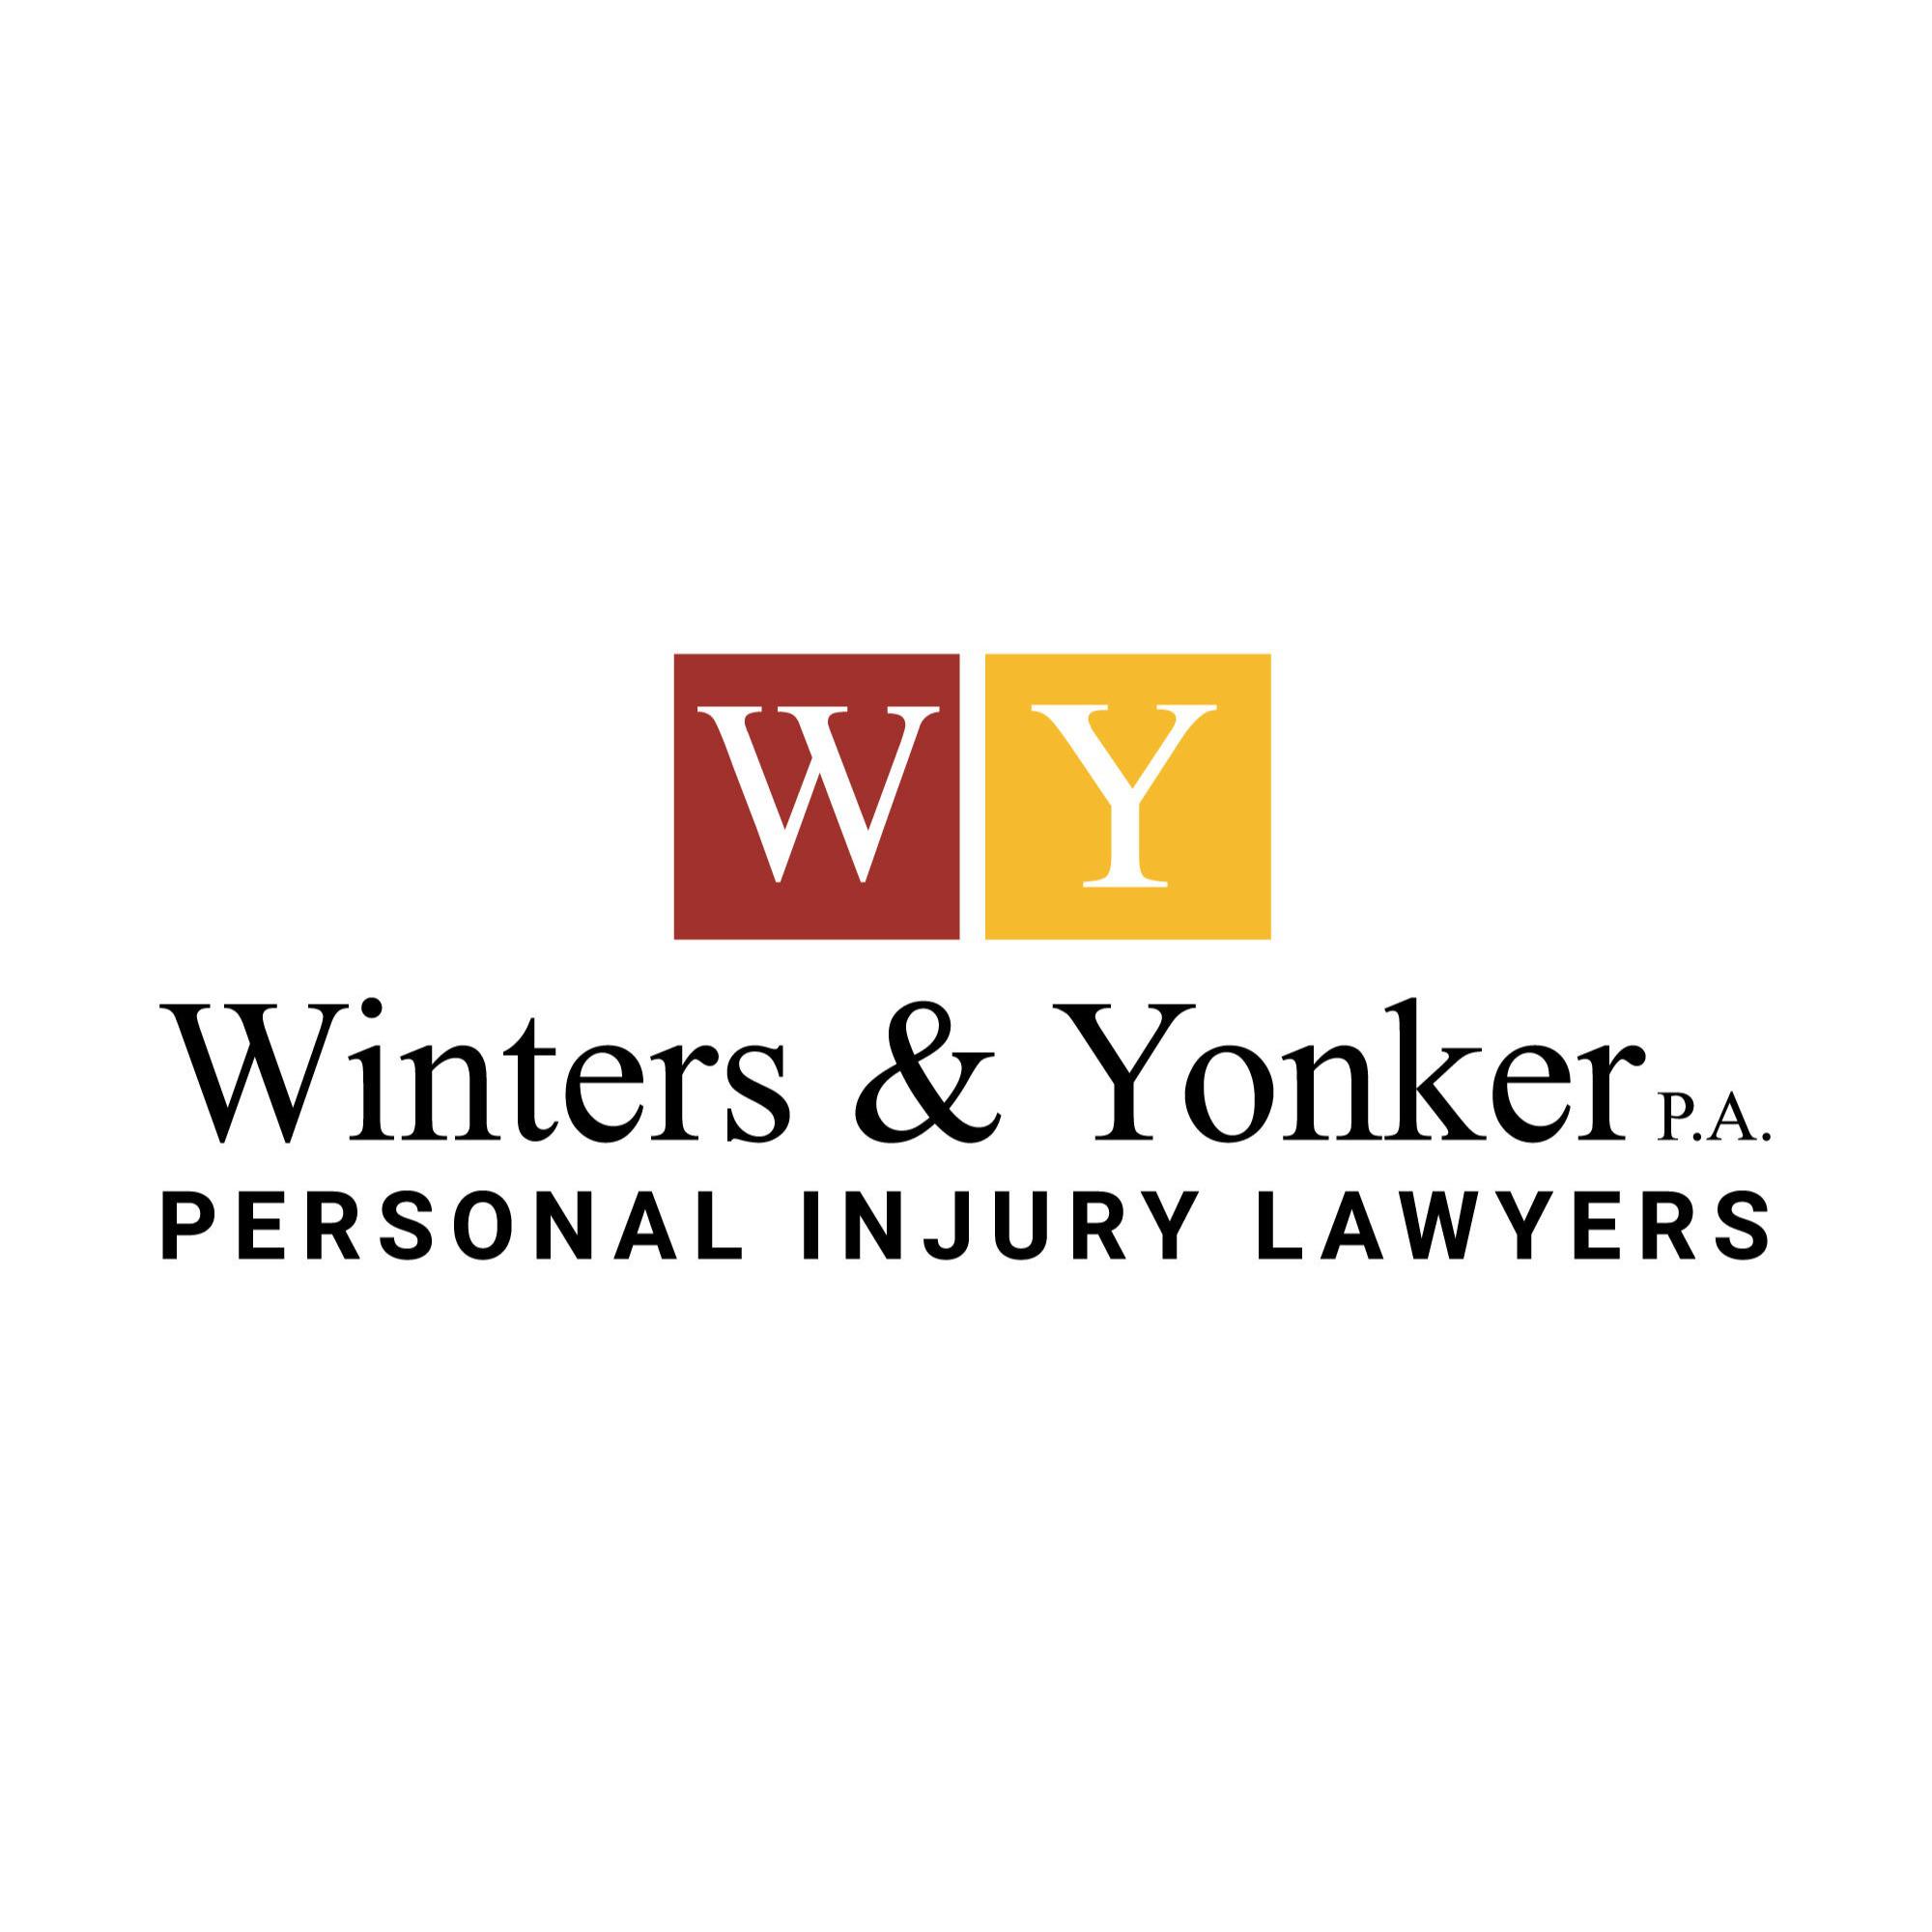 Winters & Yonker Personal Injury Lawyers - Tampa, FL 33606 - (813)223-6200 | ShowMeLocal.com